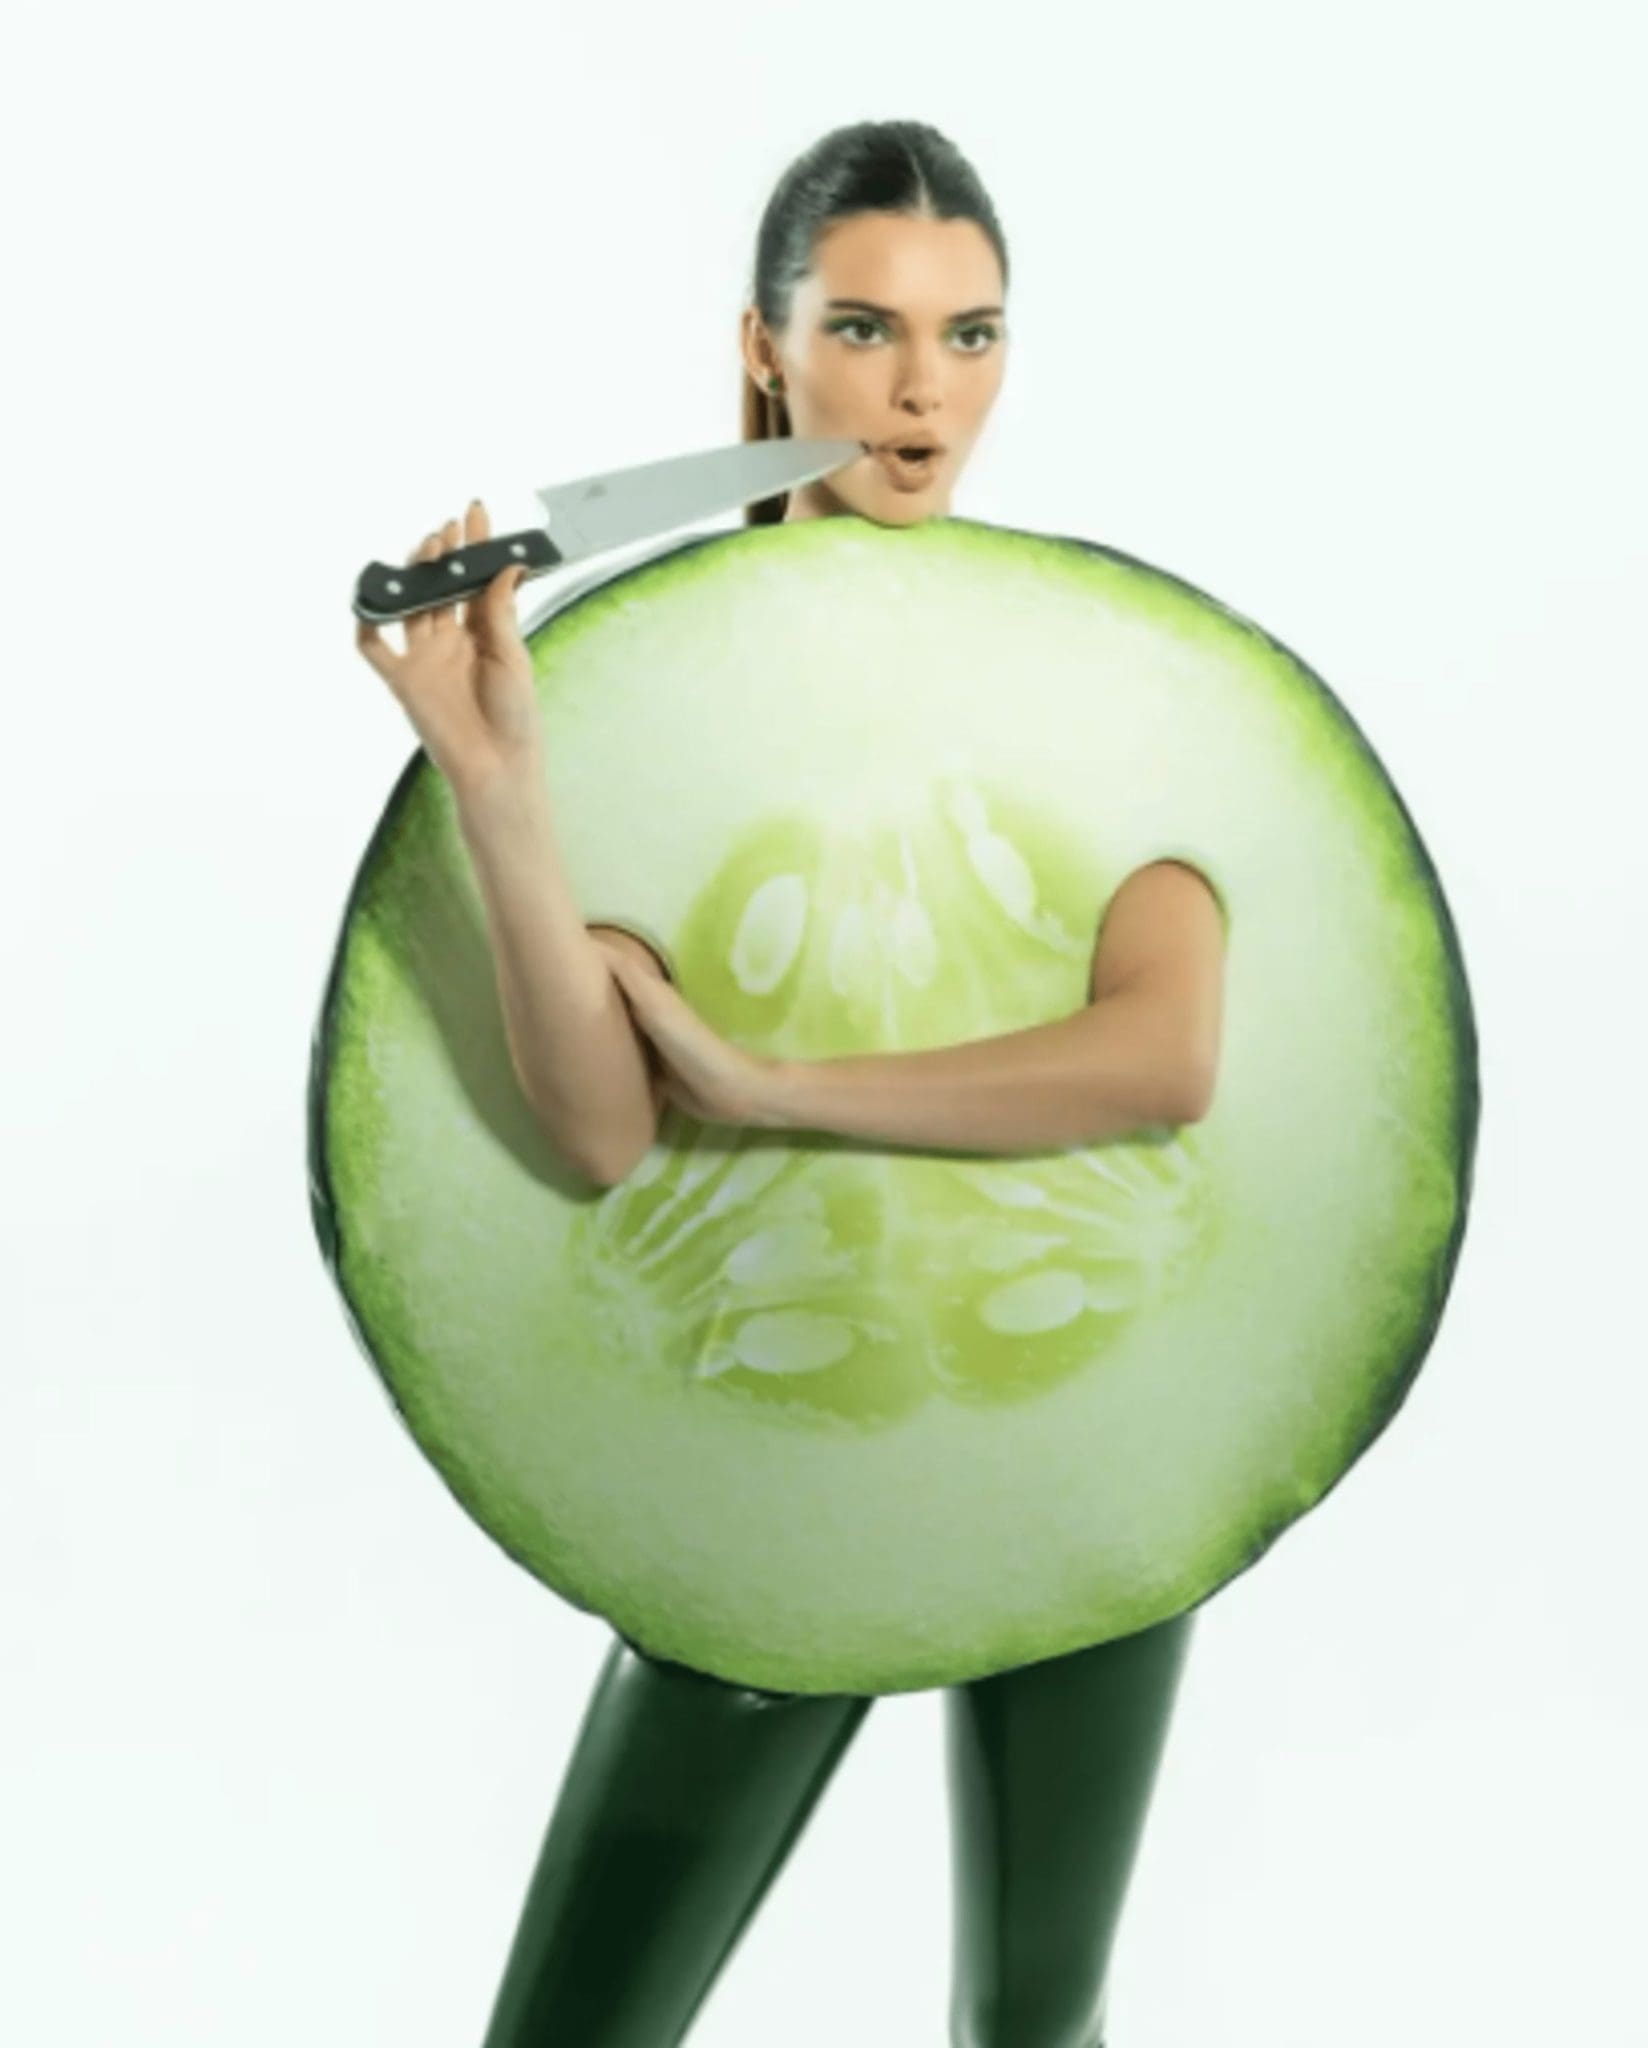 For Halloween, Kendall Jenner Wore A Cucumber Costume